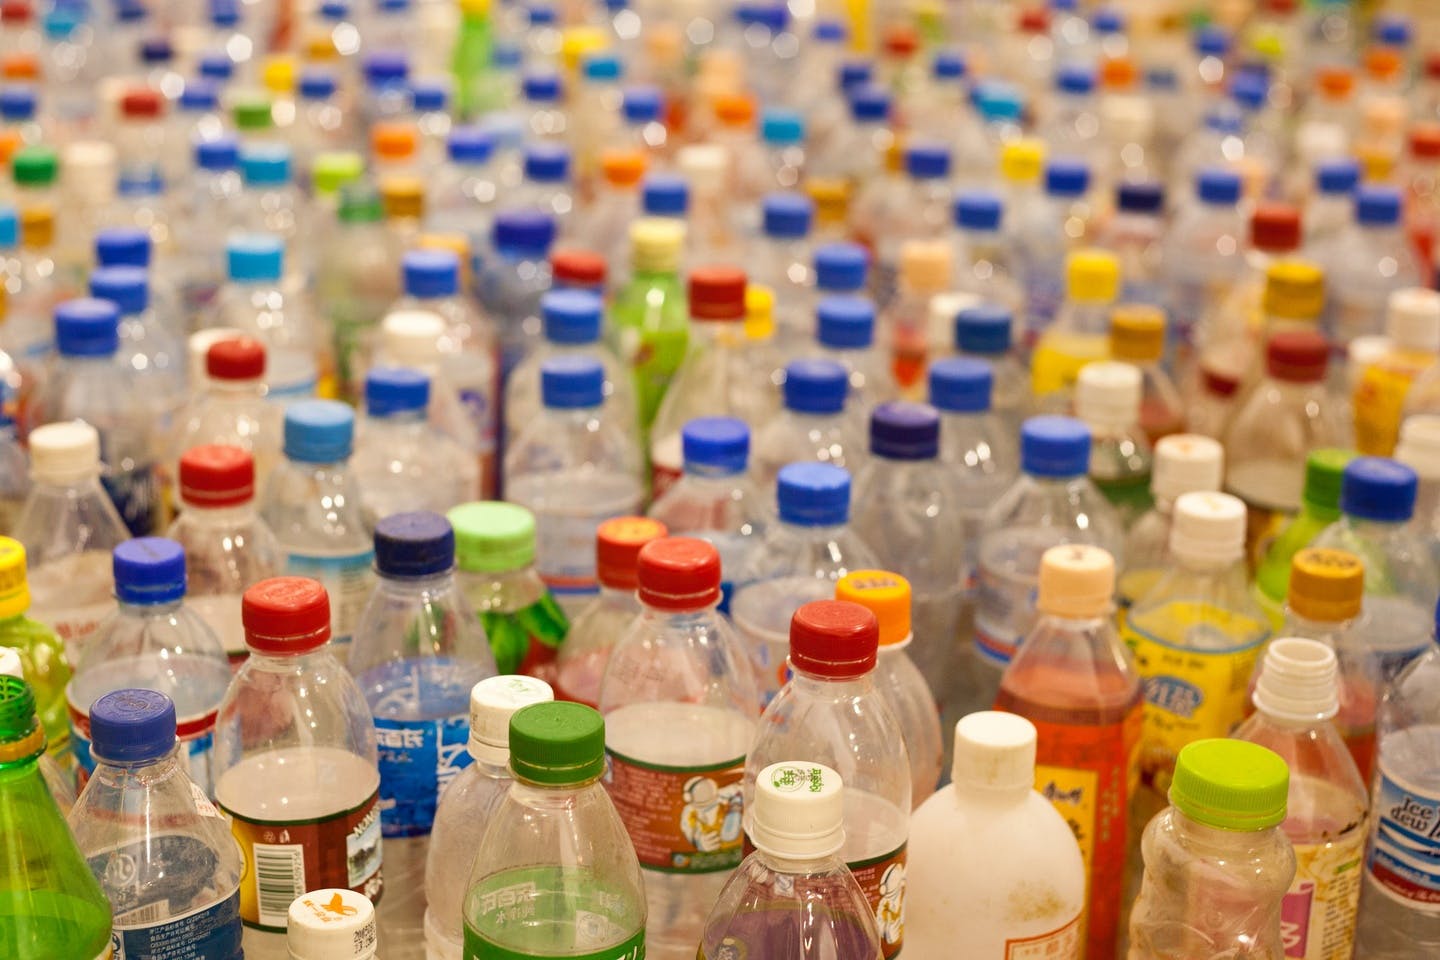 Plastic bottles holding 2.3 litres are least harmful to the planet